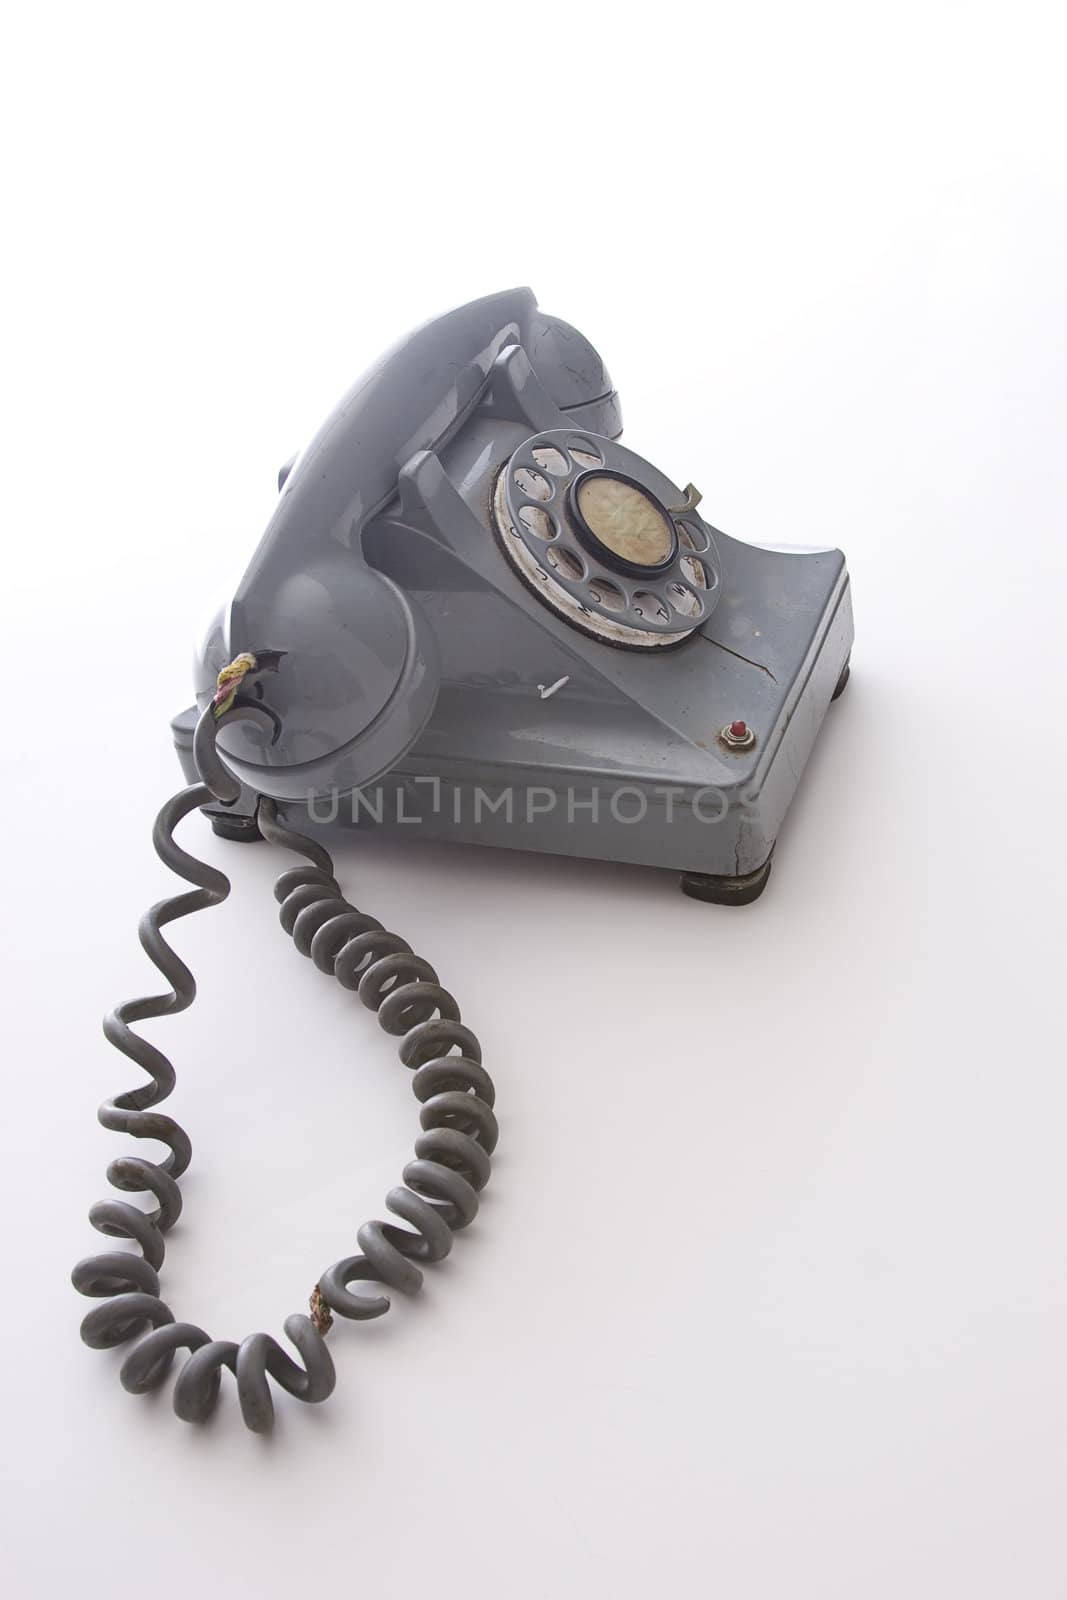 dirty vintage gray rotary phone with crack casing and expose wired